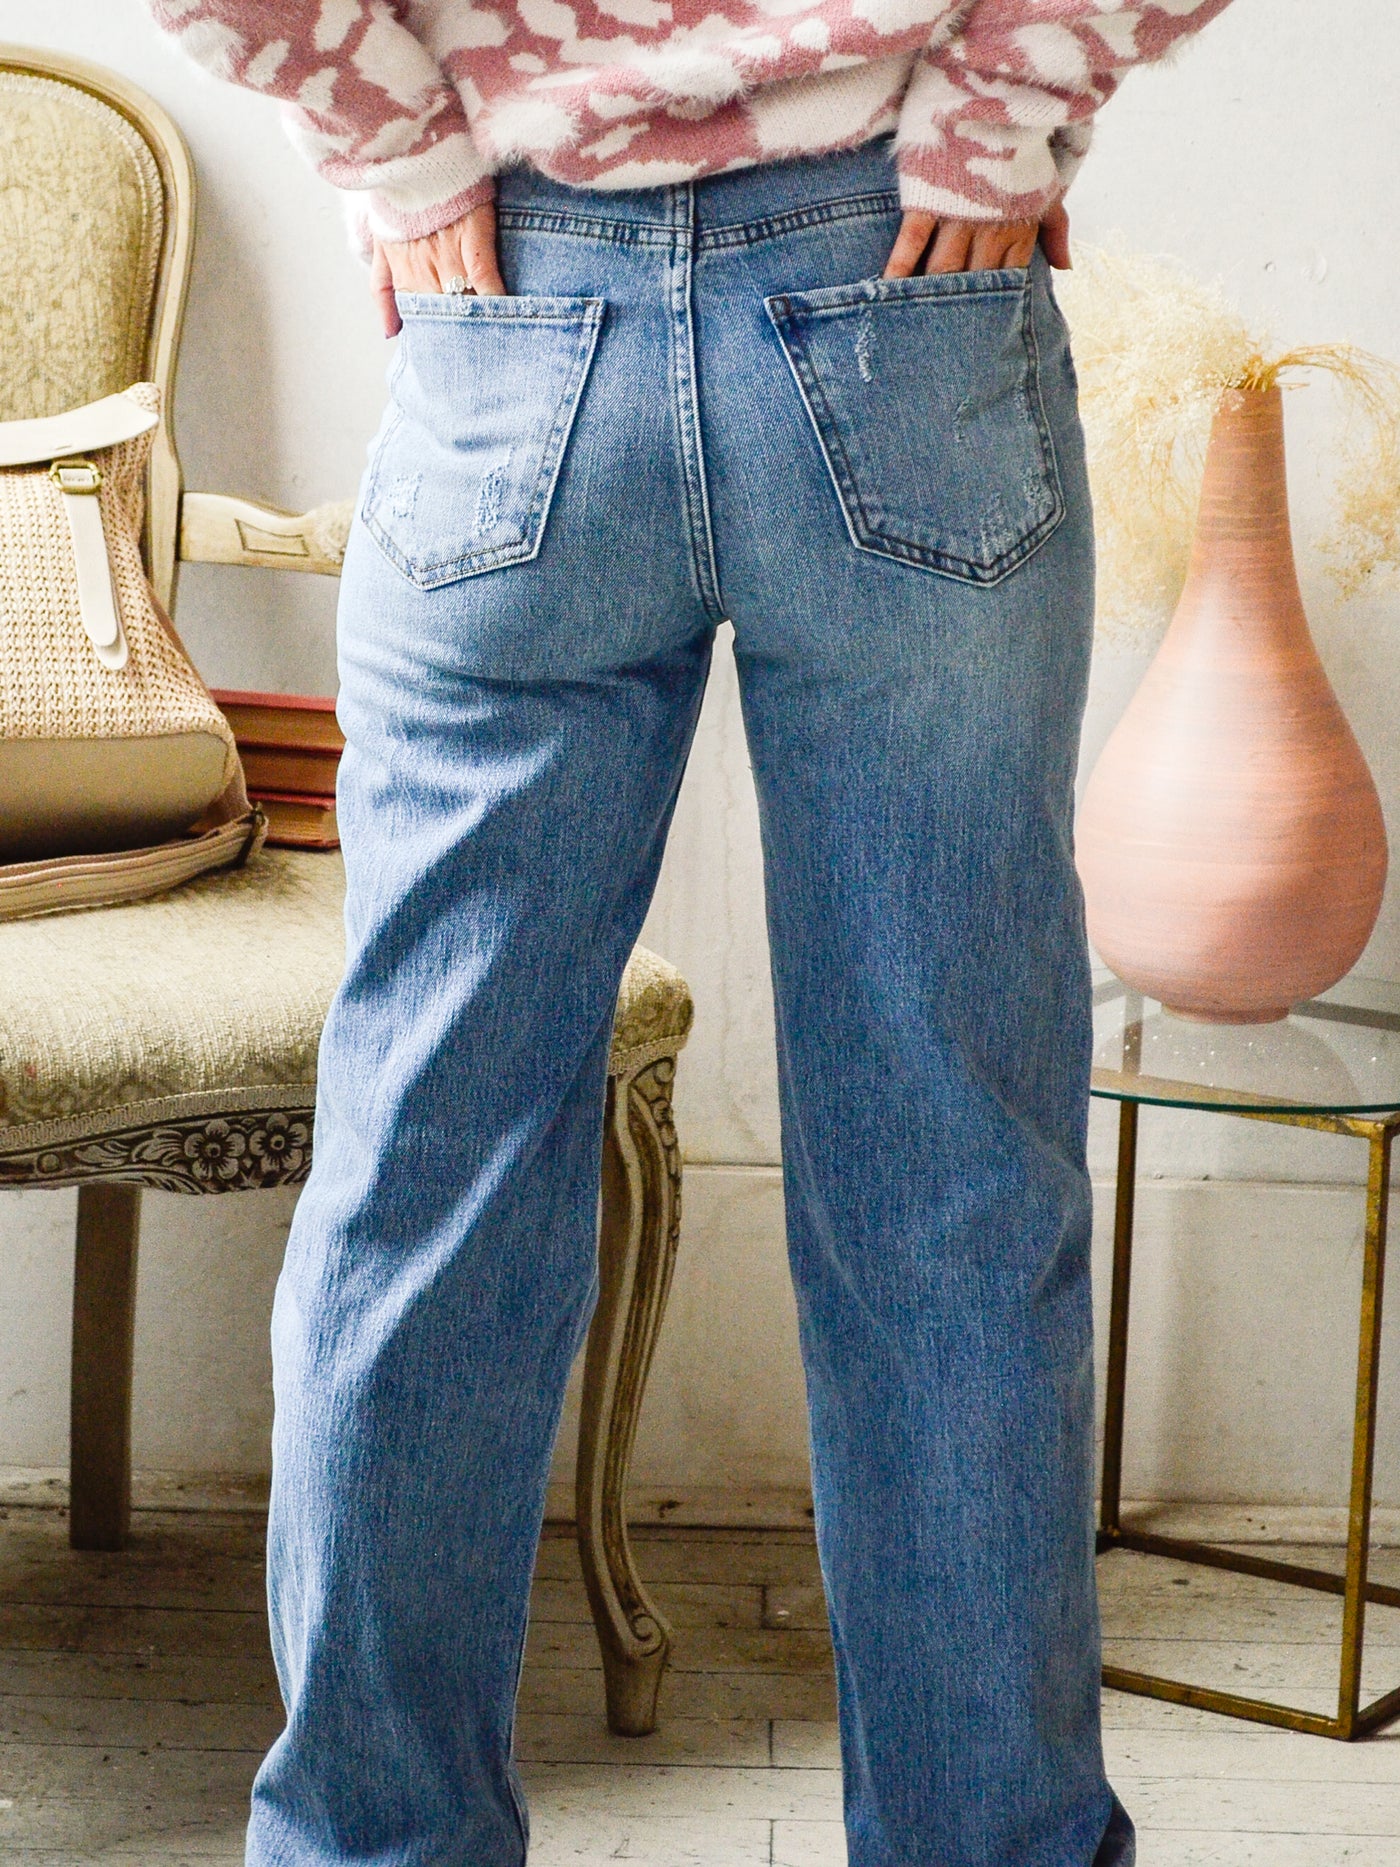 A light wash jean that is wide leg and high rise.